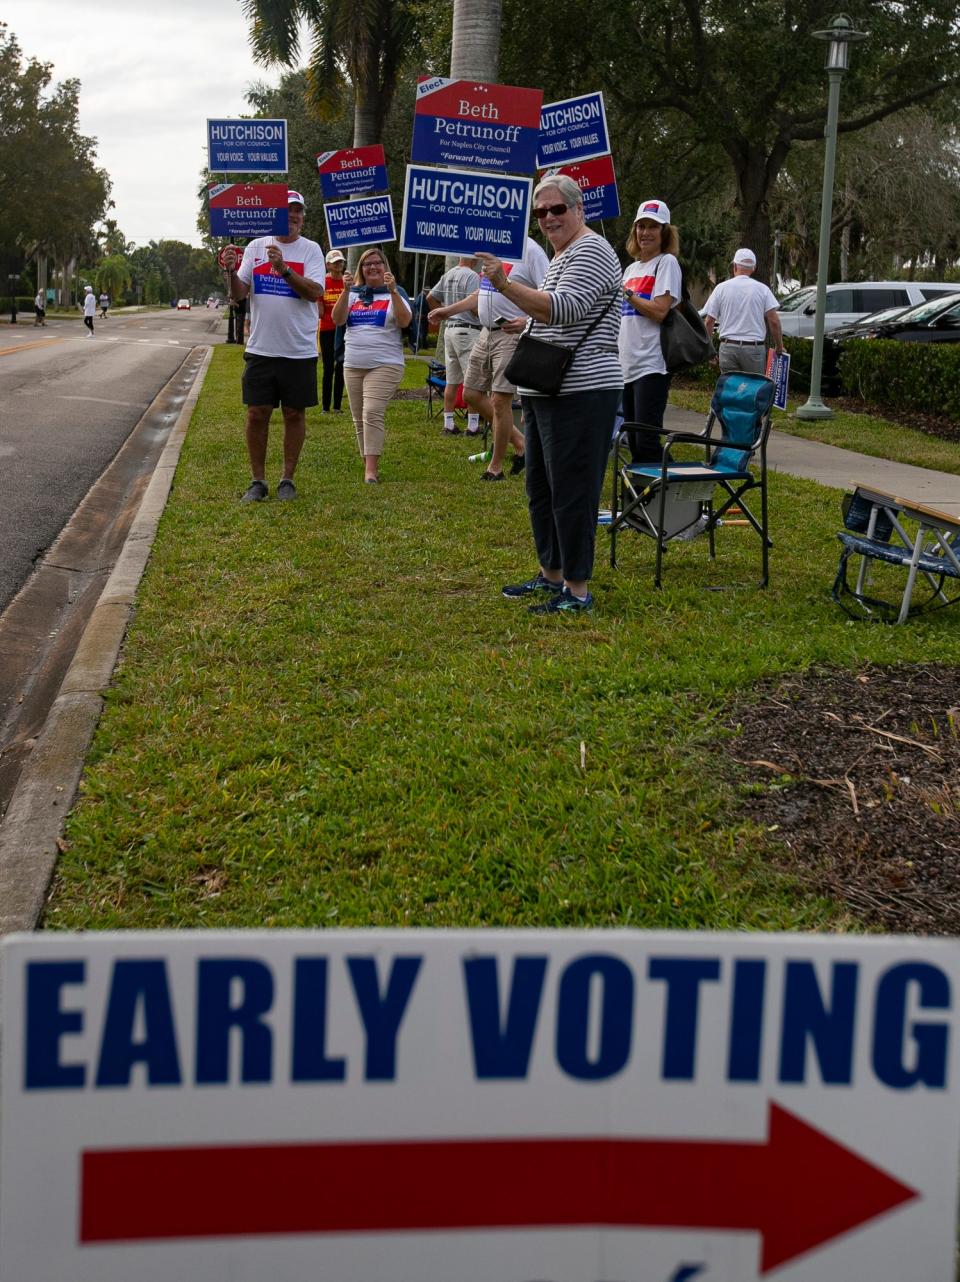 Early voting for the city of Naples began Wednesday, January 26, 2022. Residents were voting for city council candidates. 